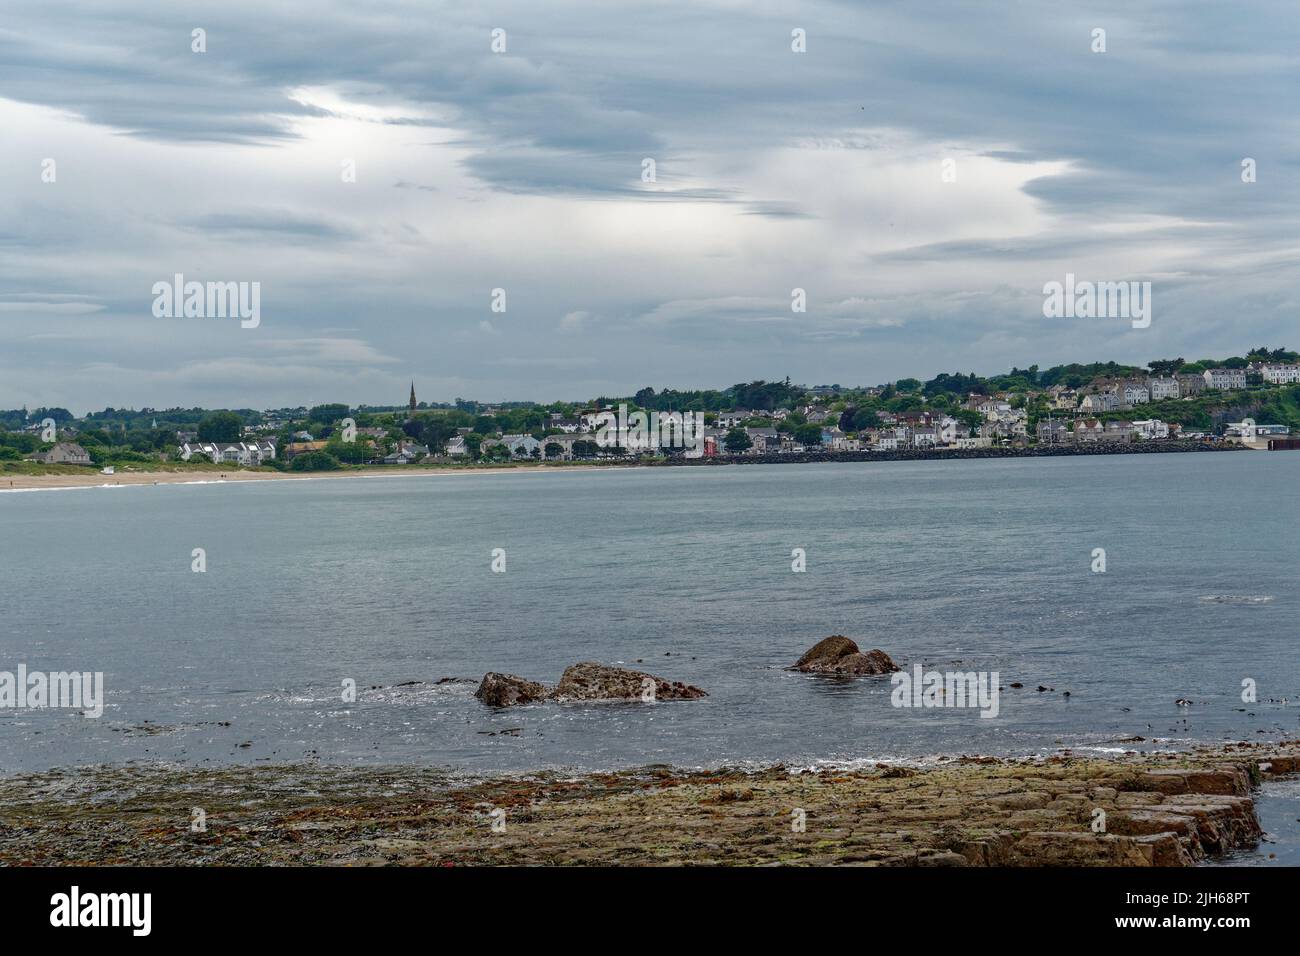 View of Ballycastle from the beach, County Antrim in Northern Ireland Stock Photo